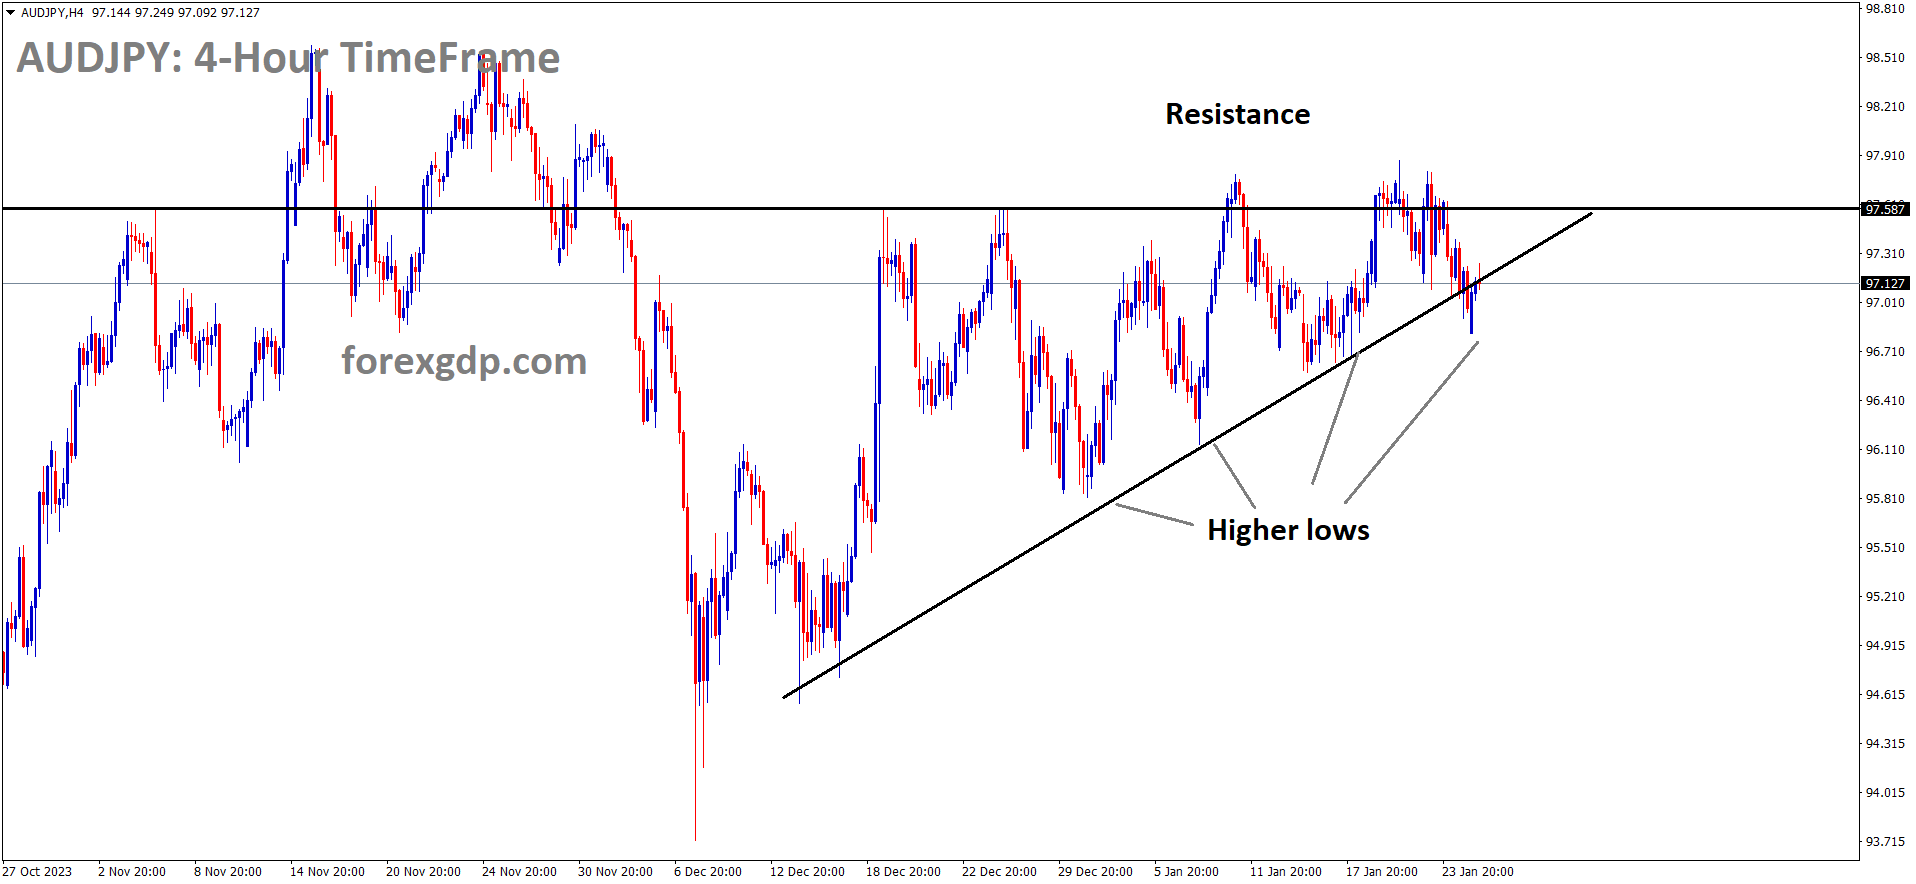 AUDJPY is moving in an Ascending triangle pattern and the market has reached the higher low area of the pattern